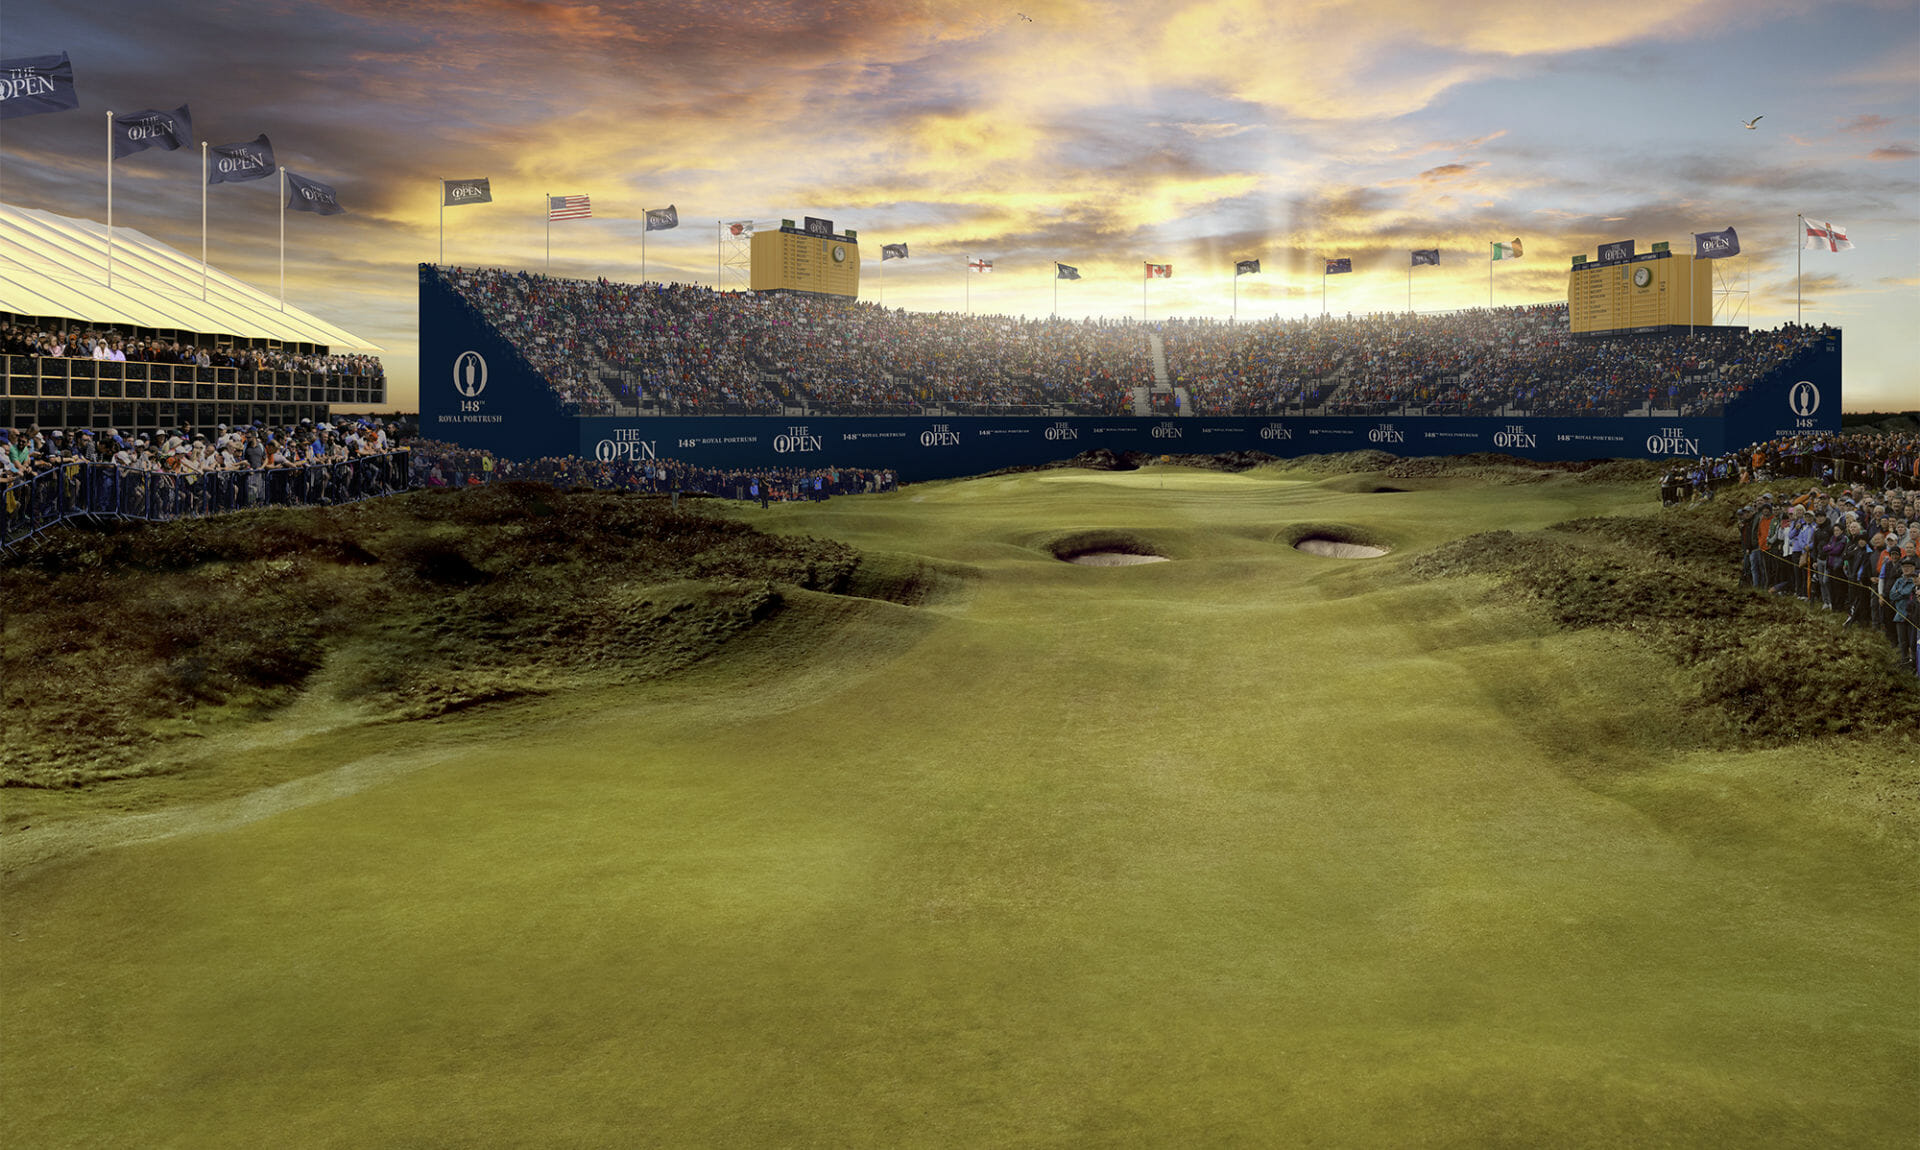 Club golfers set for once in a lifetime opportunity at Royal Portrush